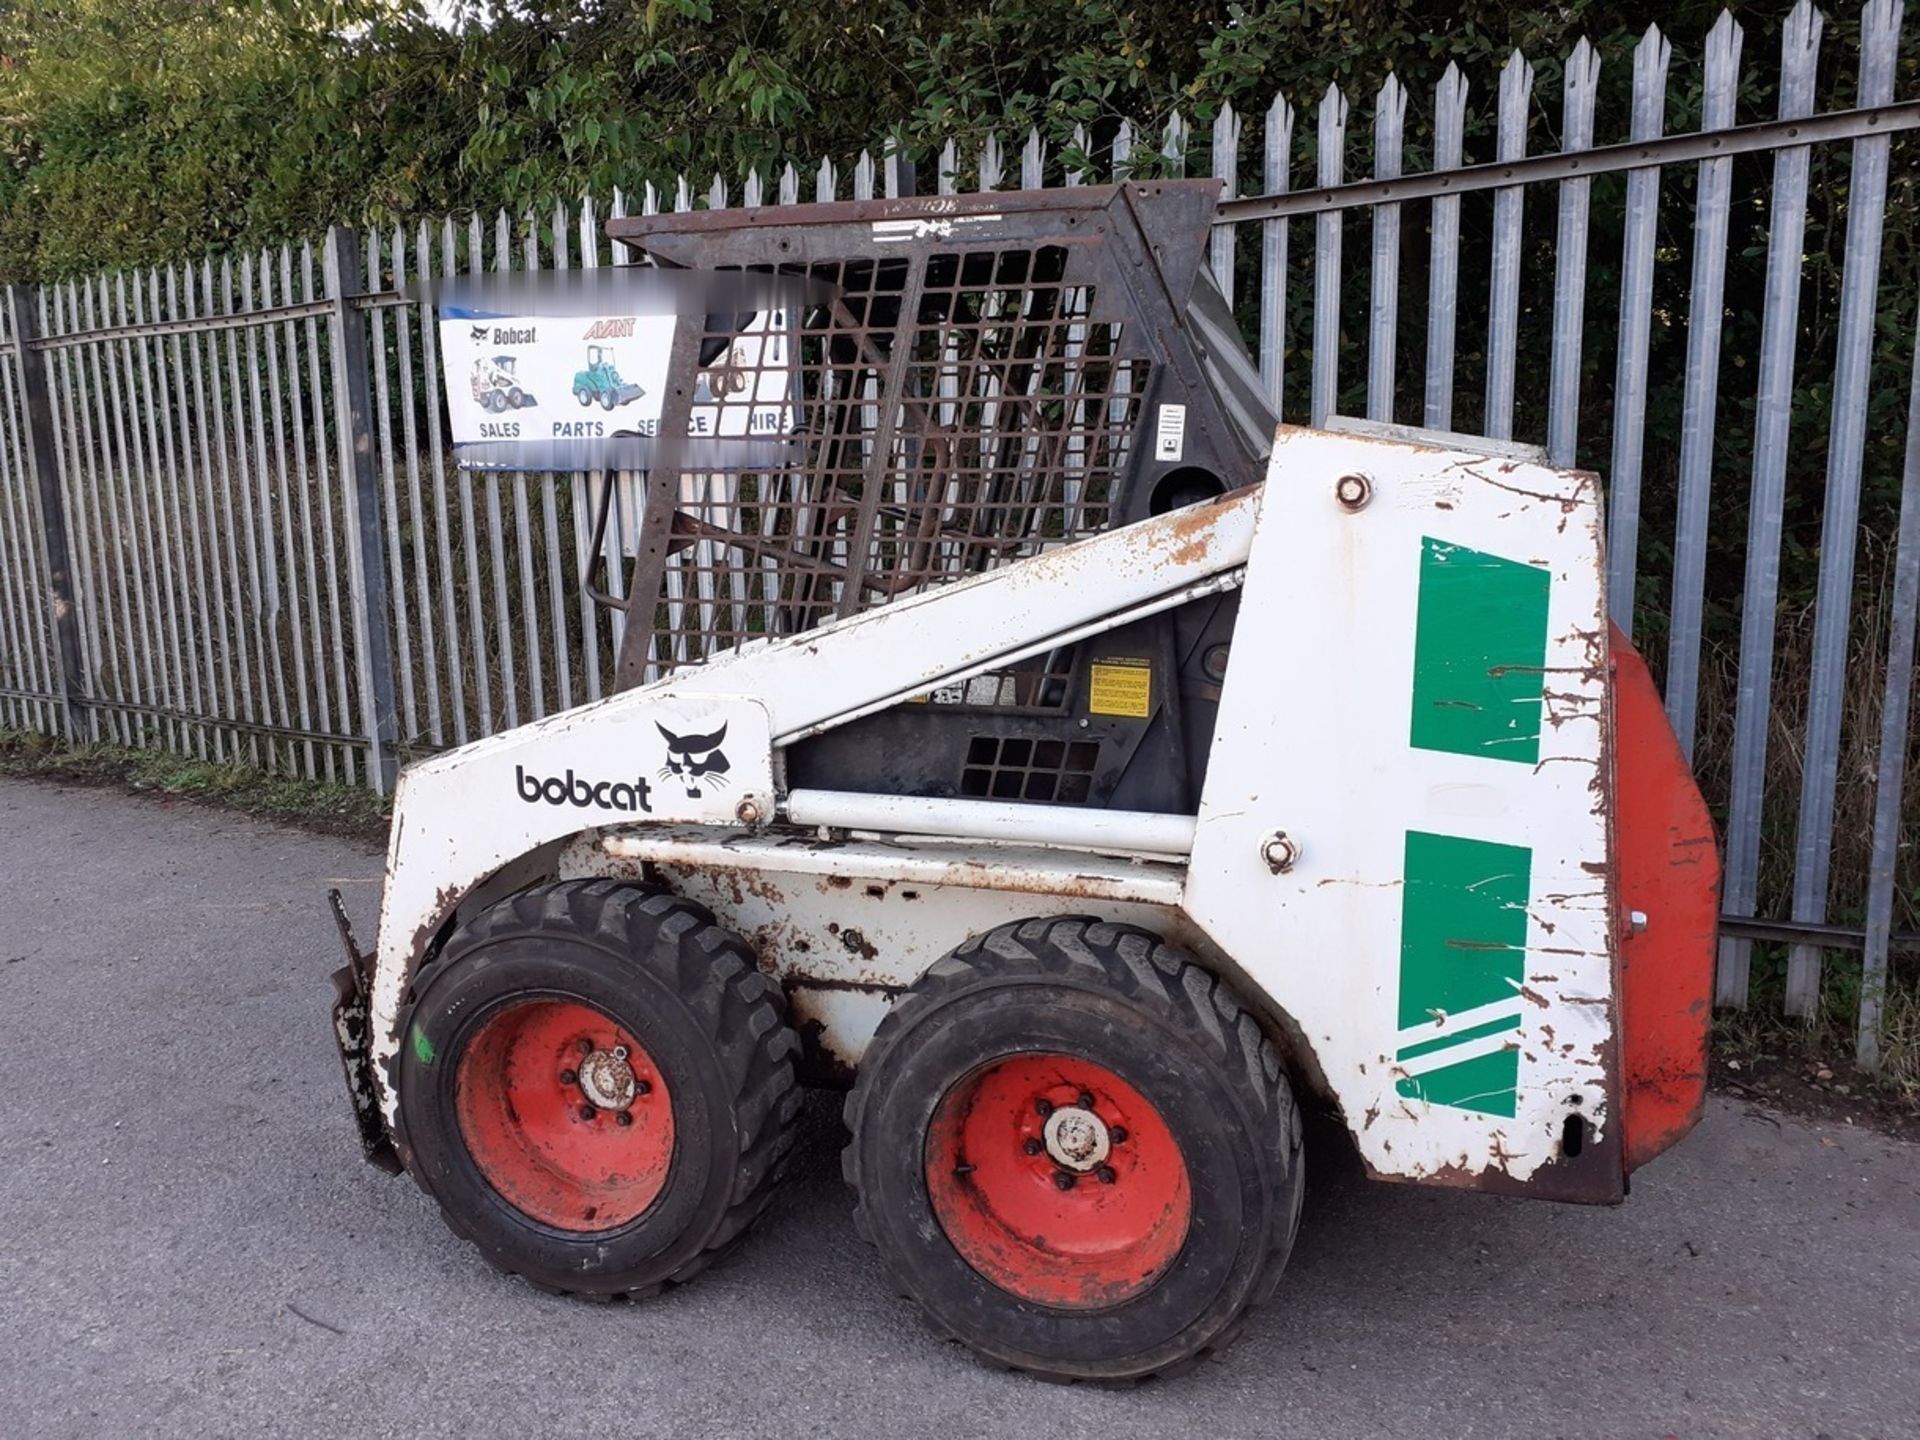 BOBCAT 643 SKID STEER, 5444 HOURS, USED CONDITION - STRAIGHT OFF A FARM *PLUS VAT* - Image 3 of 6